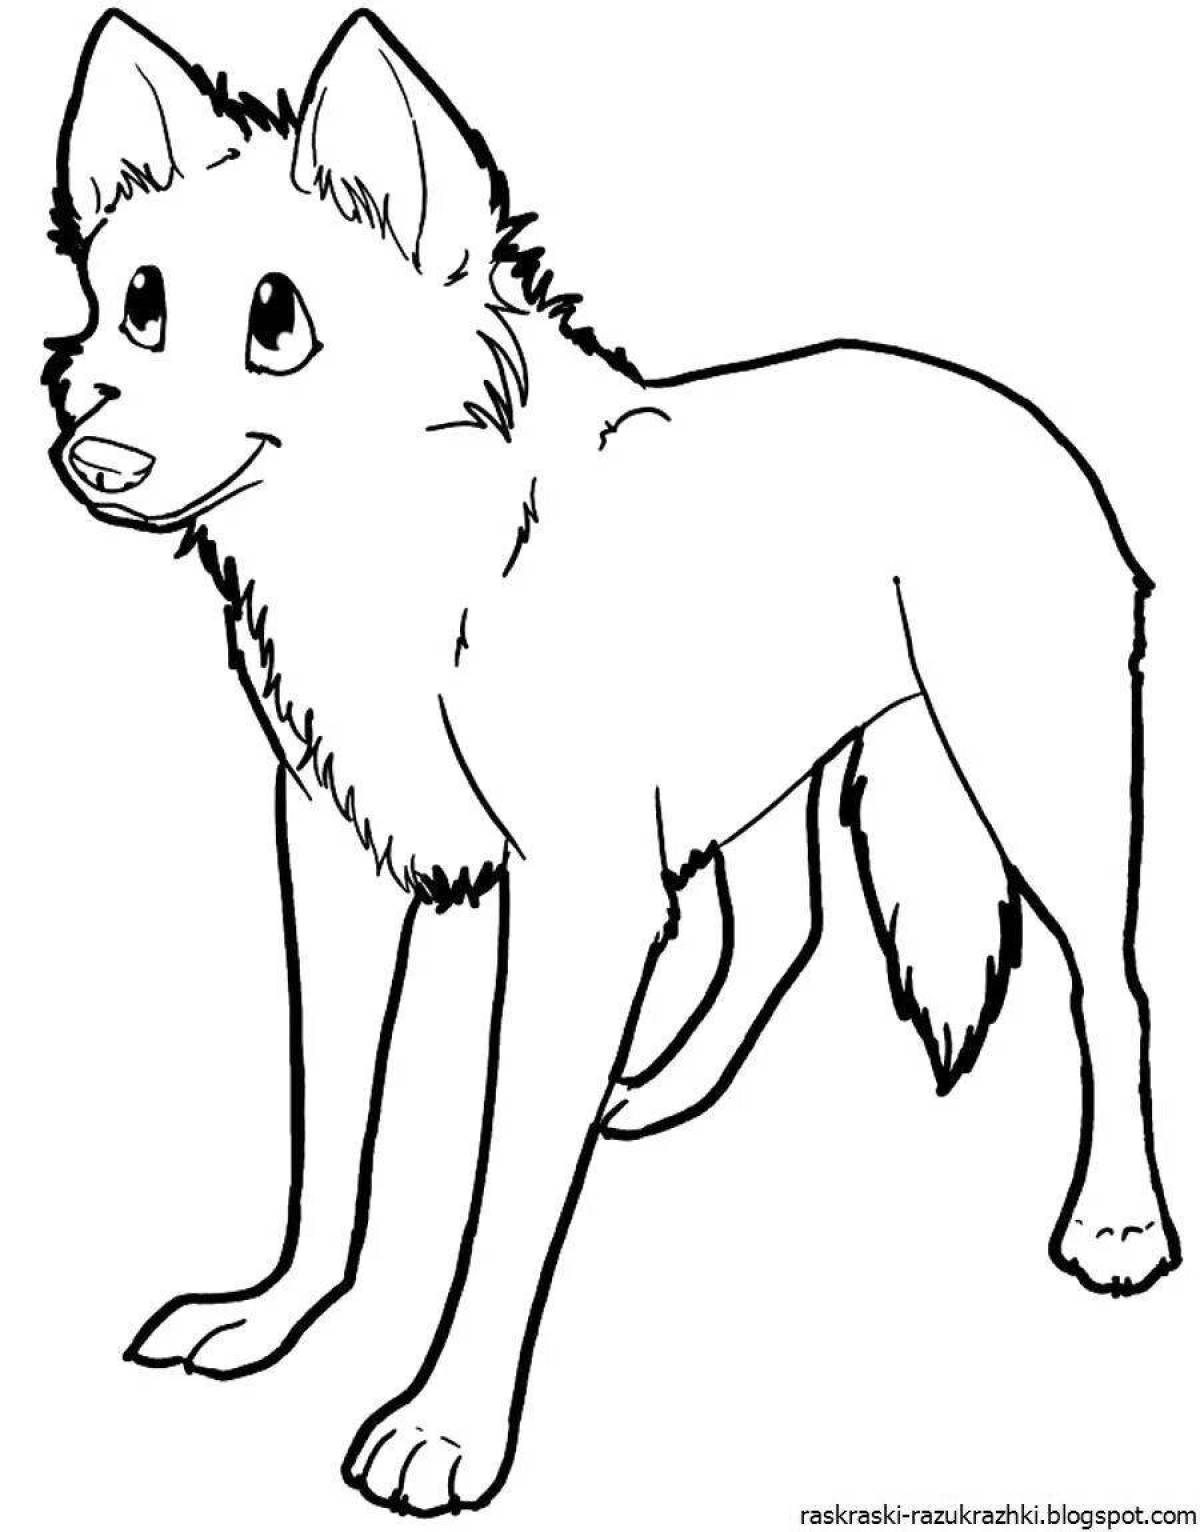 Impressive wolf coloring book for kids